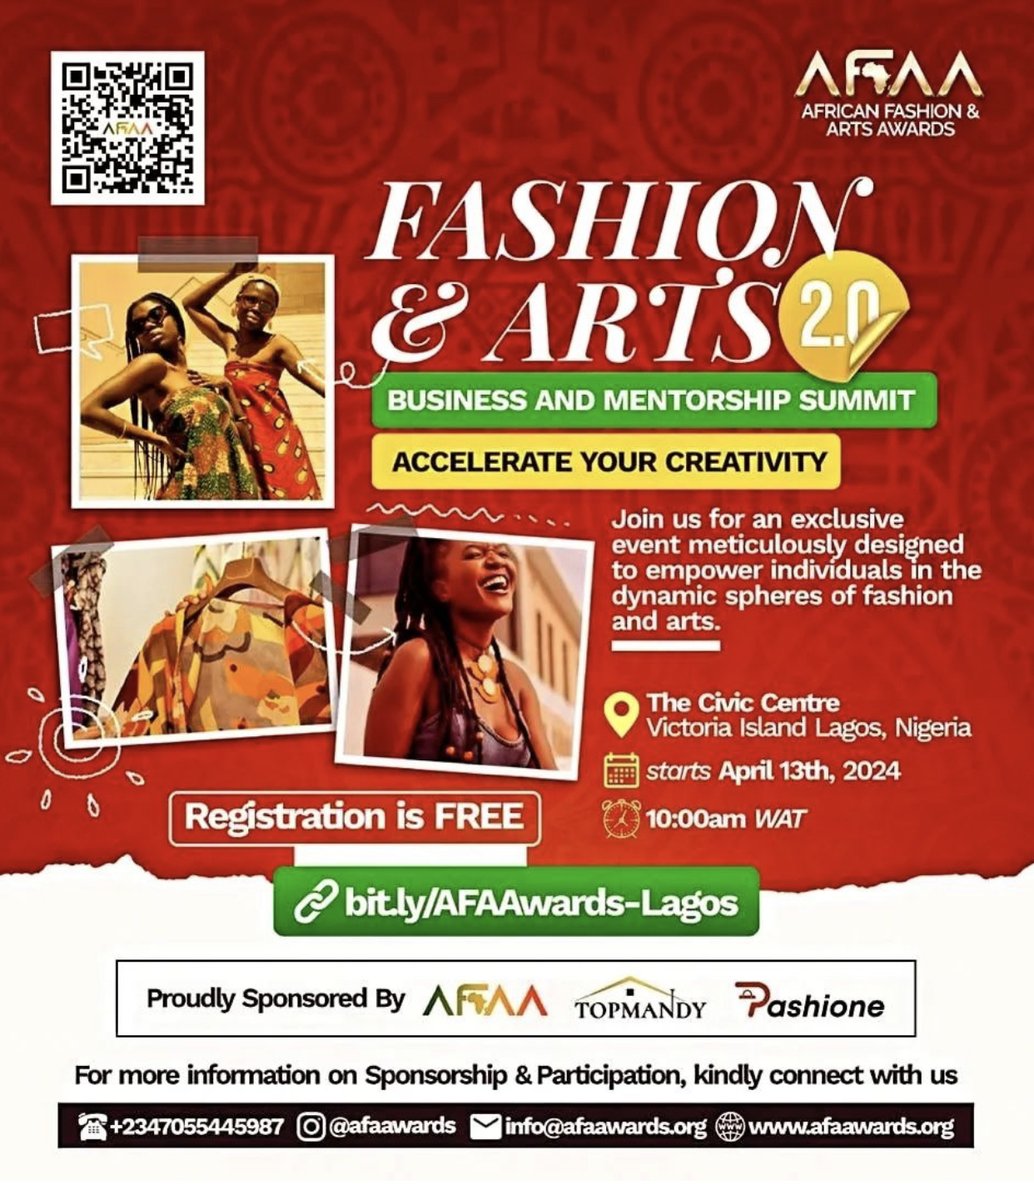 Join me at the AFAA Fashion and Arts Business and Mentorship Summit 2.0, an event designed to empower individuals in the fashion and arts, on Saturday, 13th April 2024 in Lagos, Nigeria. Register to attend via the link: bit.ly/AFAAwards-Lagos.

#AFAAwards #MichaelFasere